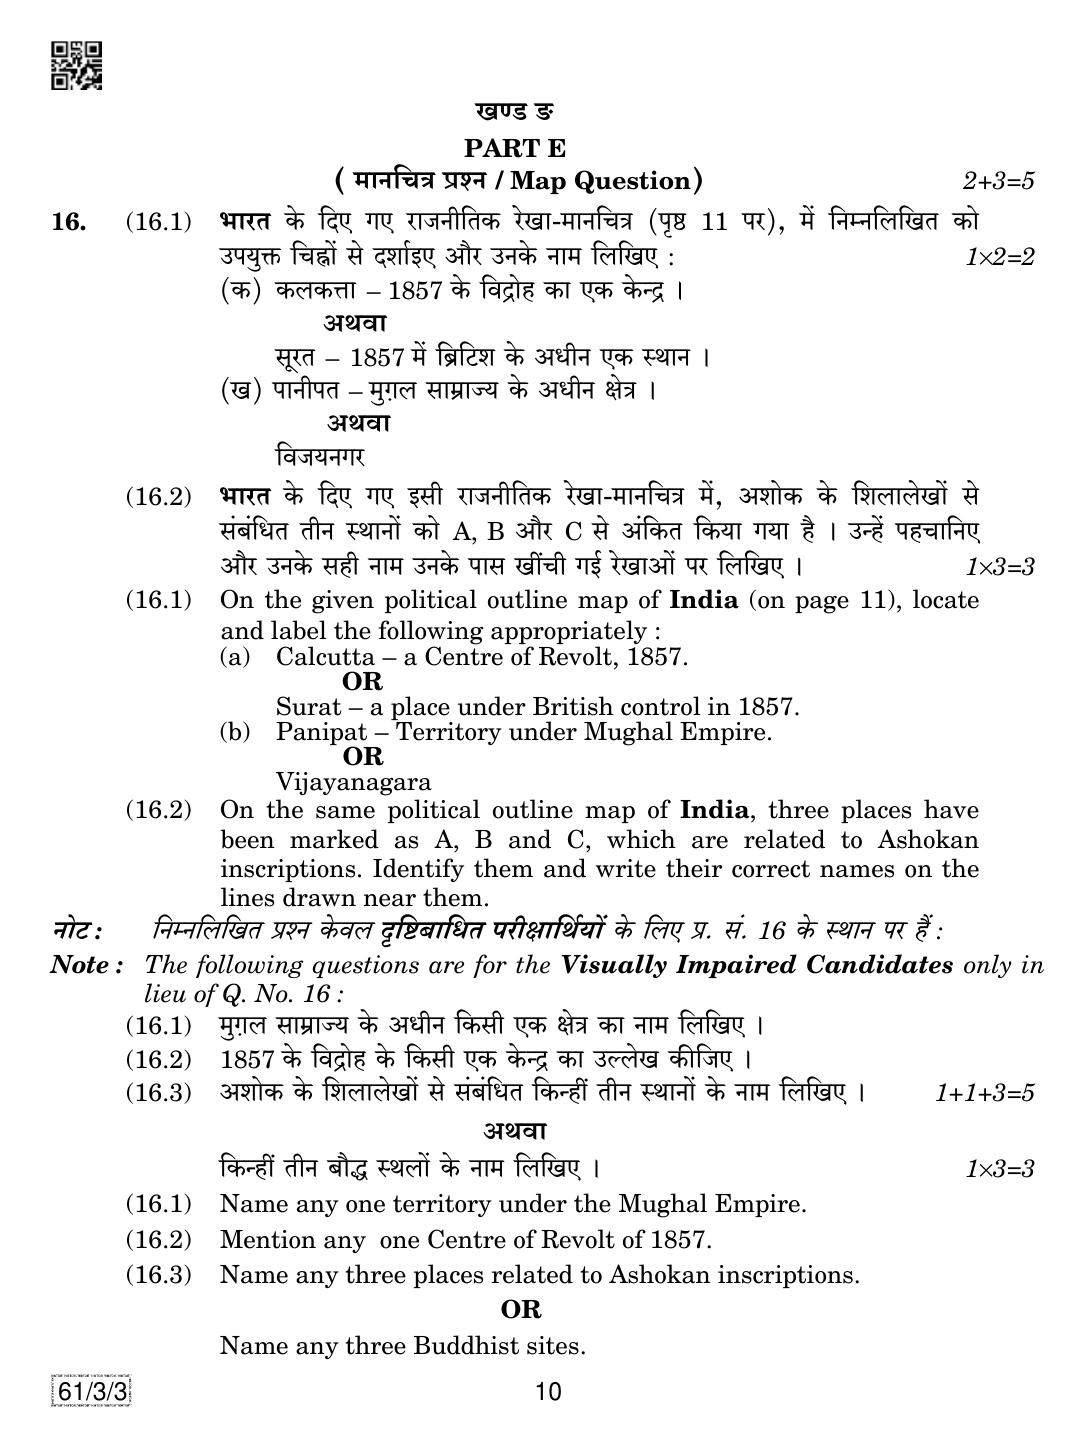 CBSE Class 12 61-3-3 History 2019 Question Paper - Page 10